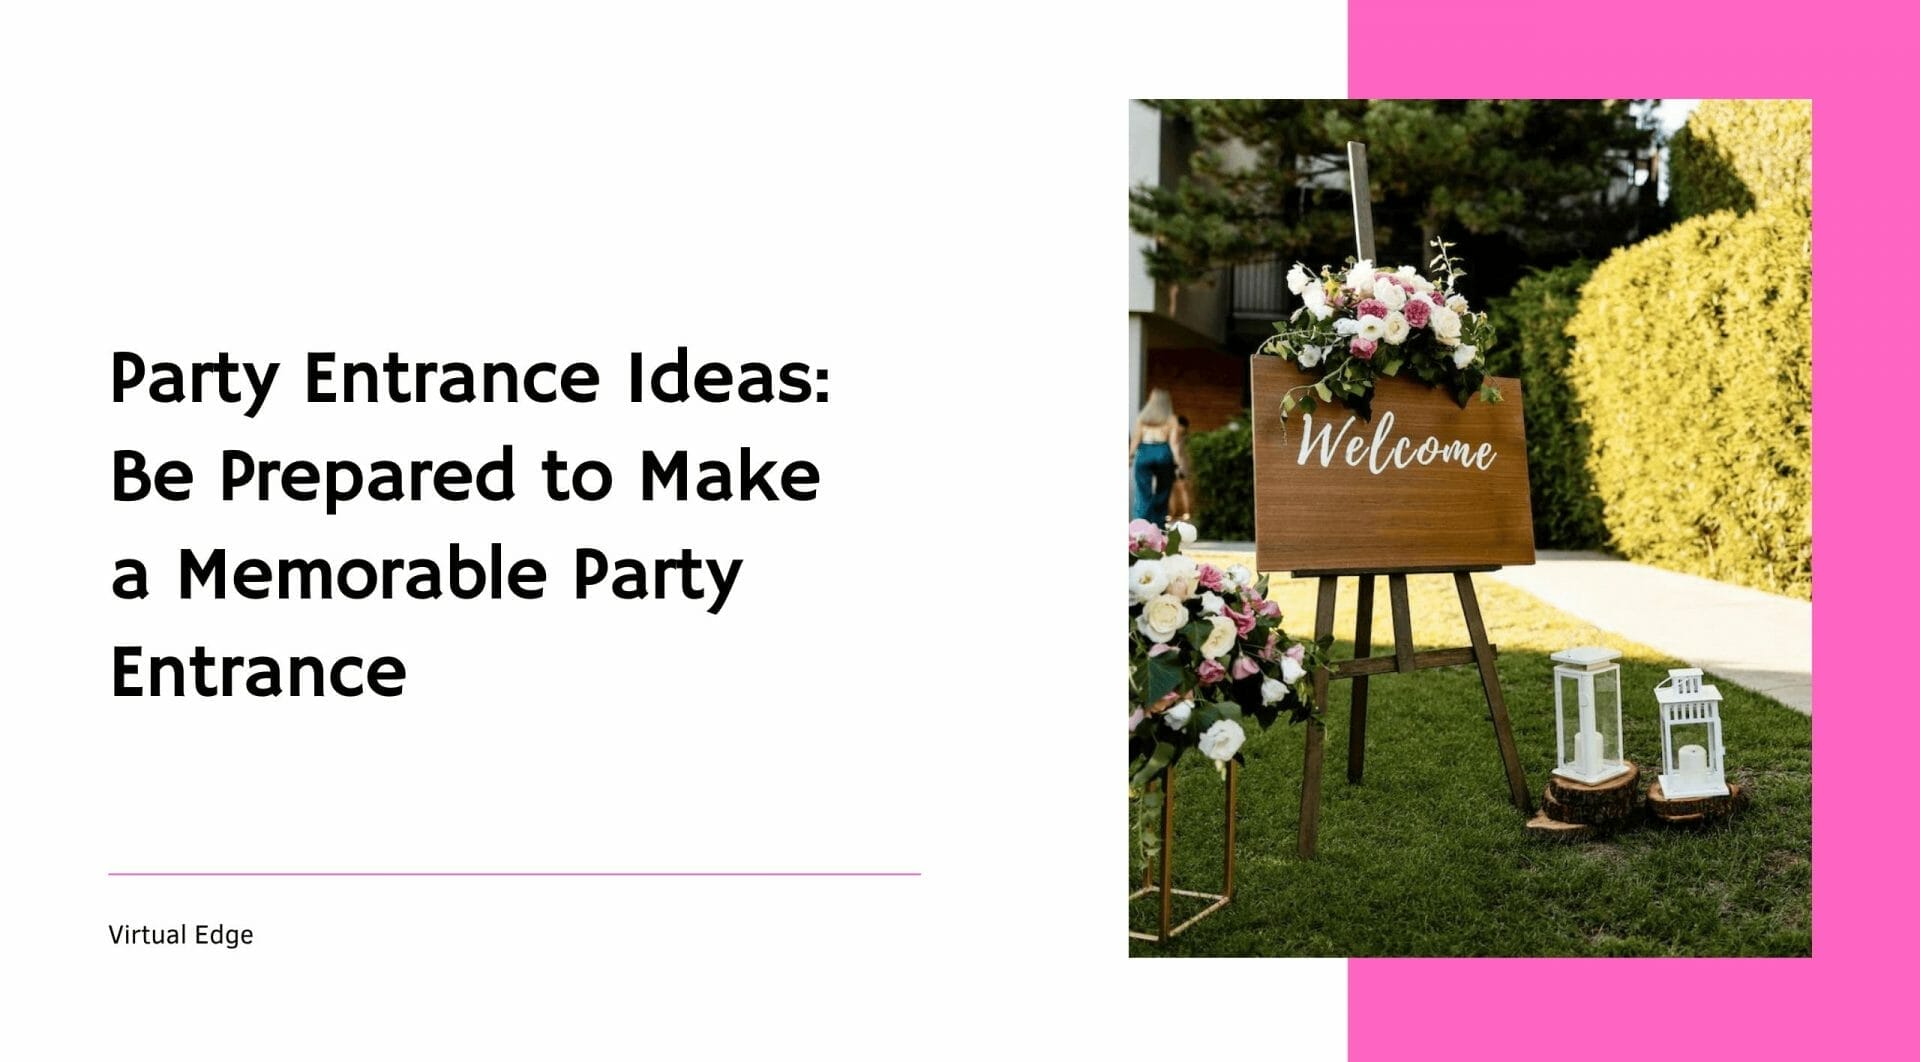 Party Entrance Ideas: Be Prepared to Make a Memorable Party Entrance